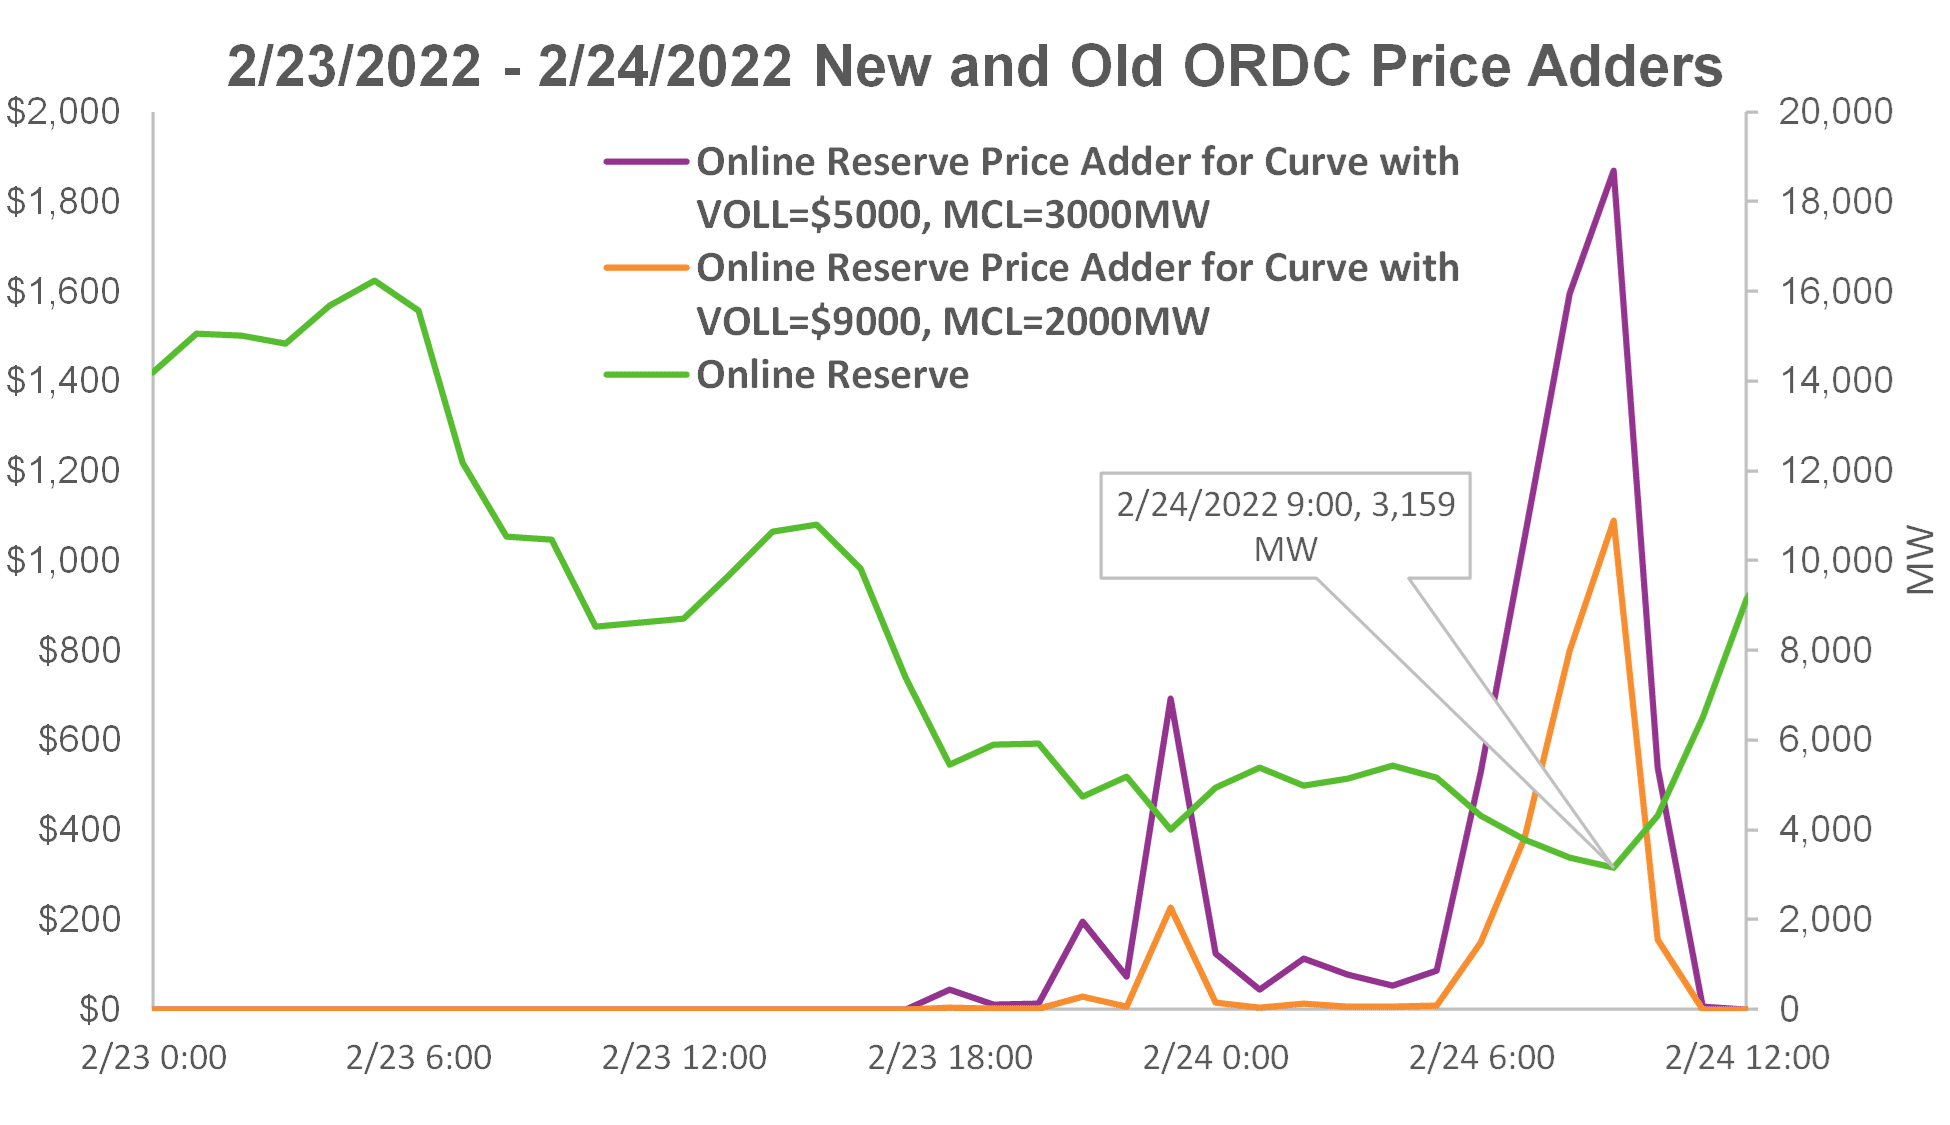 Graph showing Feb 23-24 new and old ORDC price adders